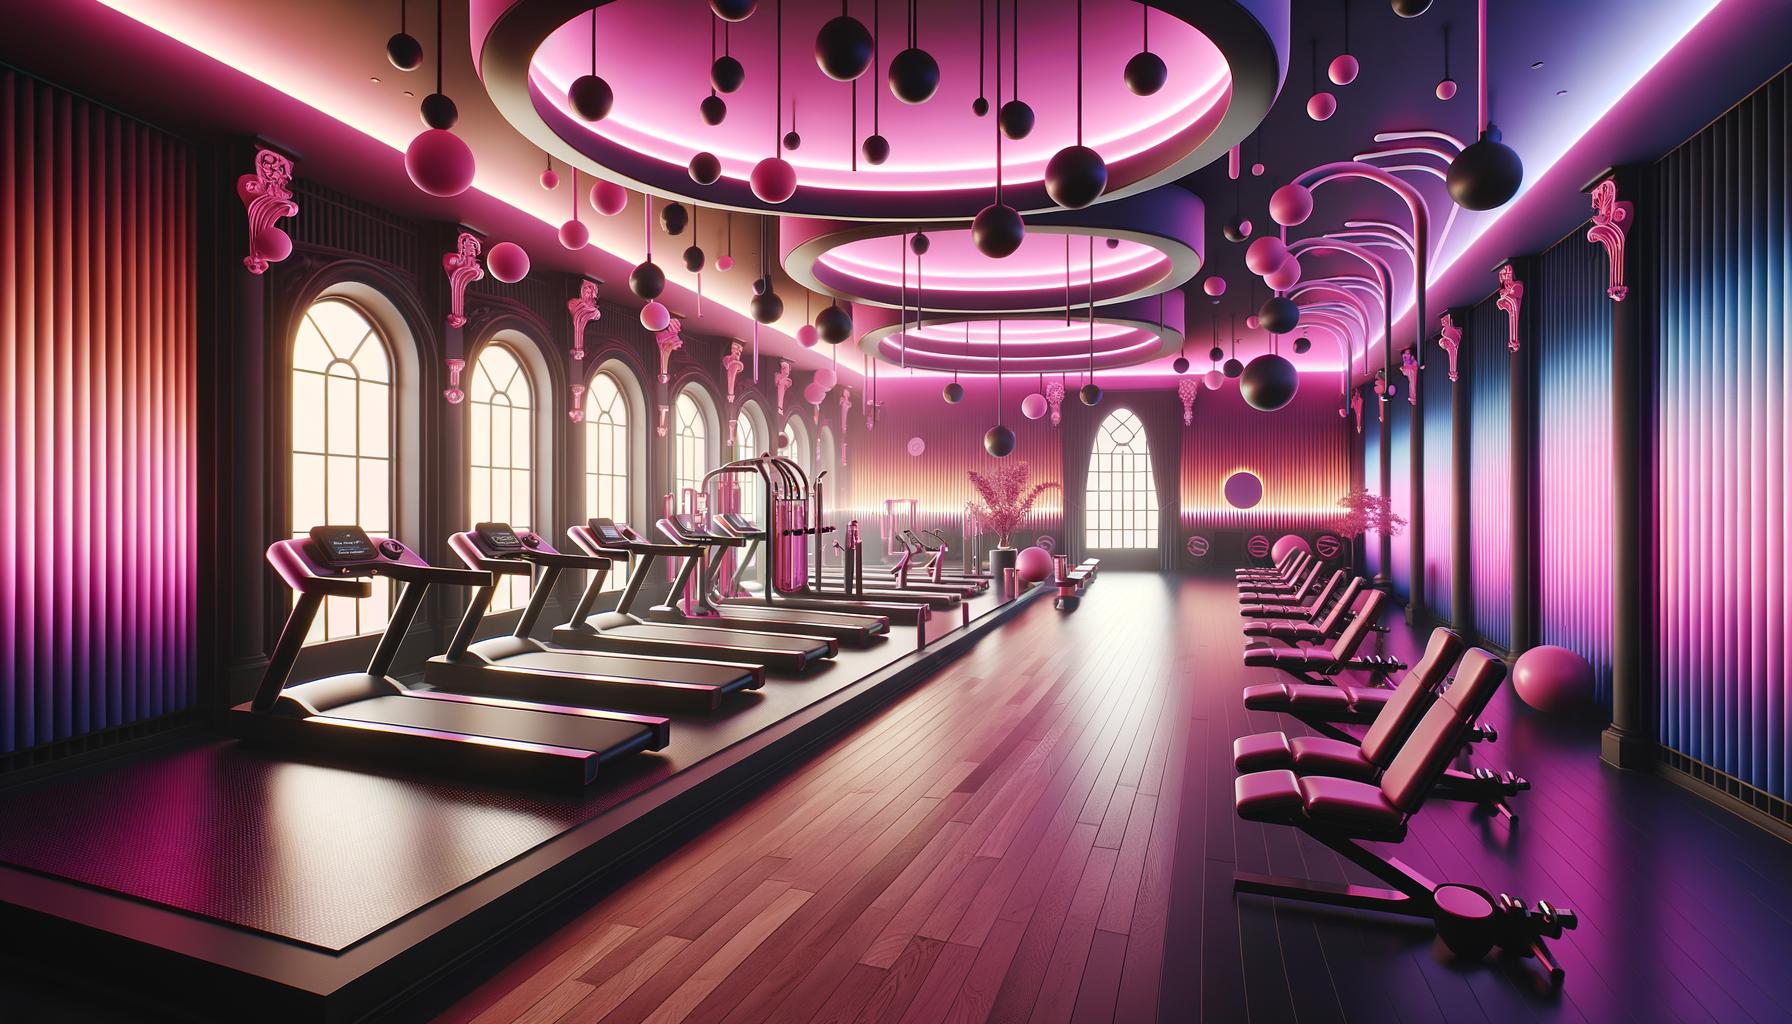 Discover how adjustable sensory settings in fitness spaces enhance workouts for those with sensory sensitivities.